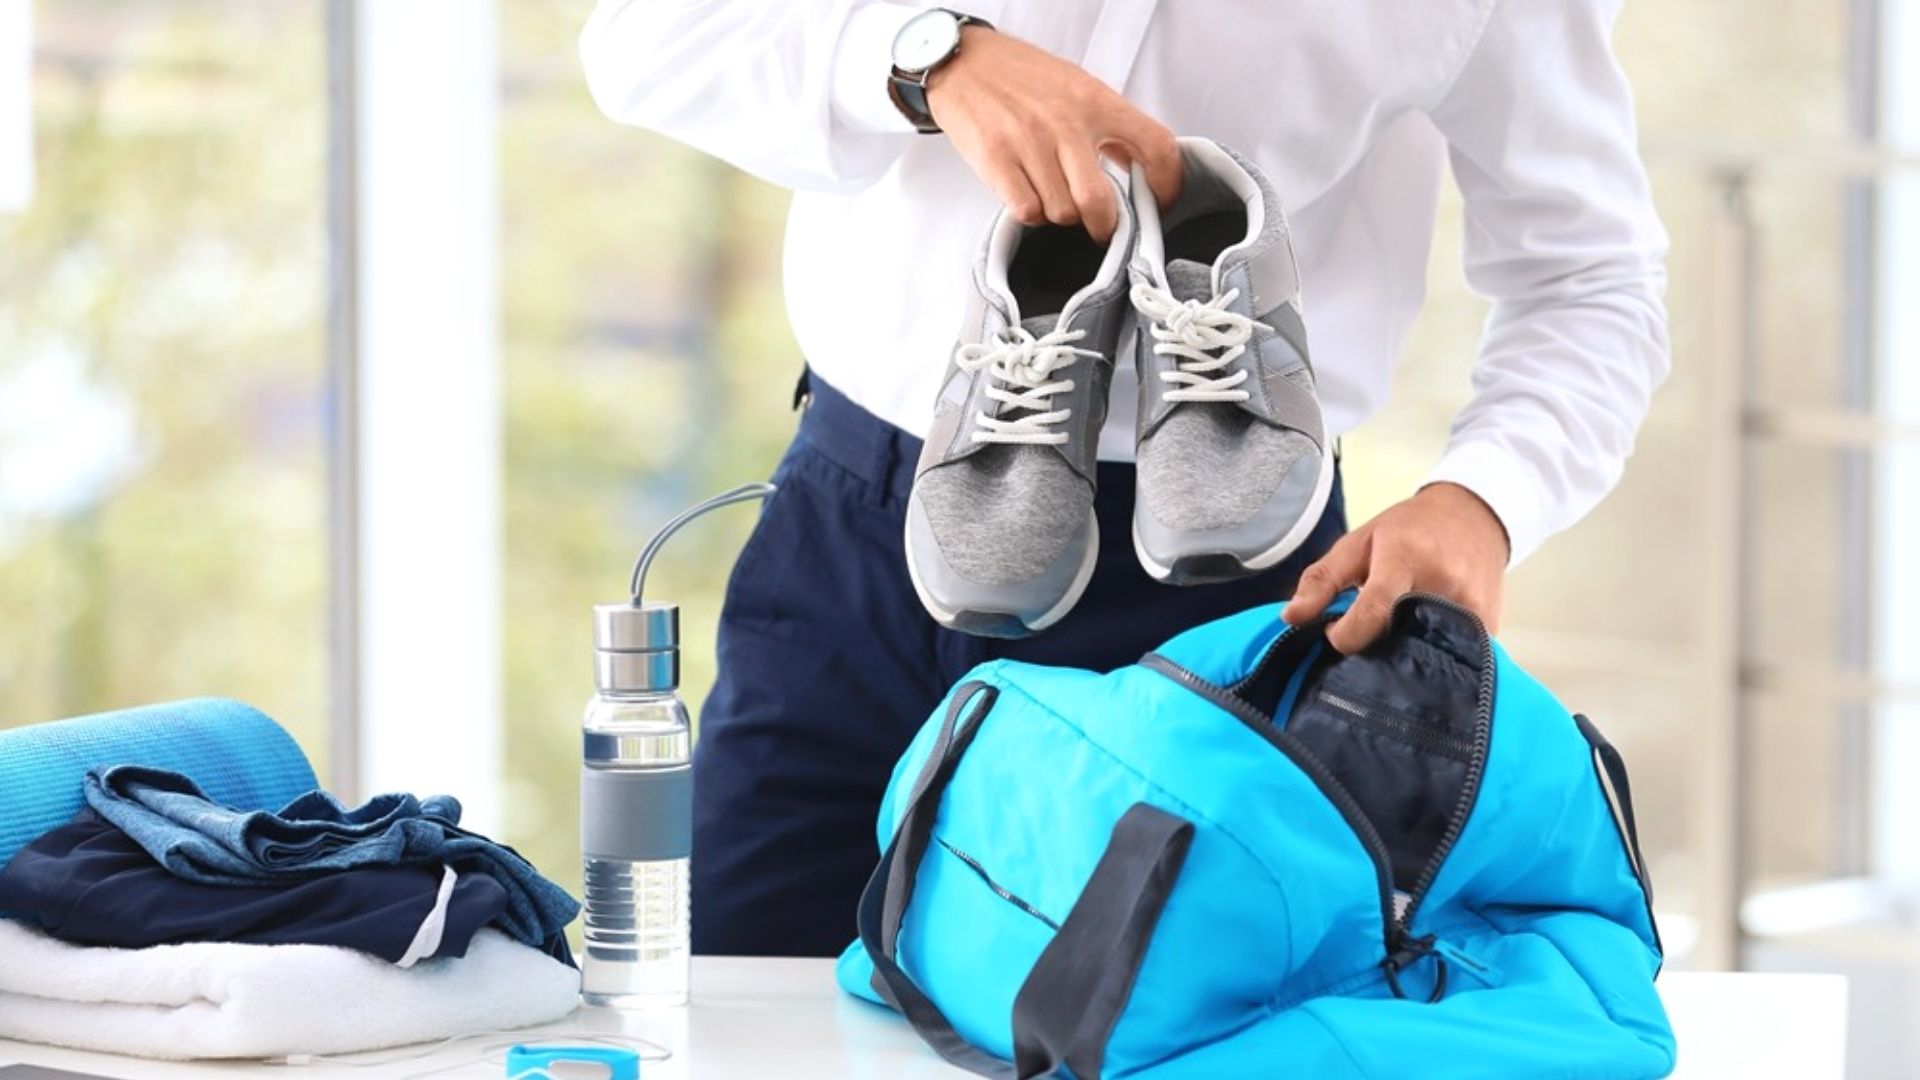 Packing Shoes And Accessories Into Blue Gym Bag